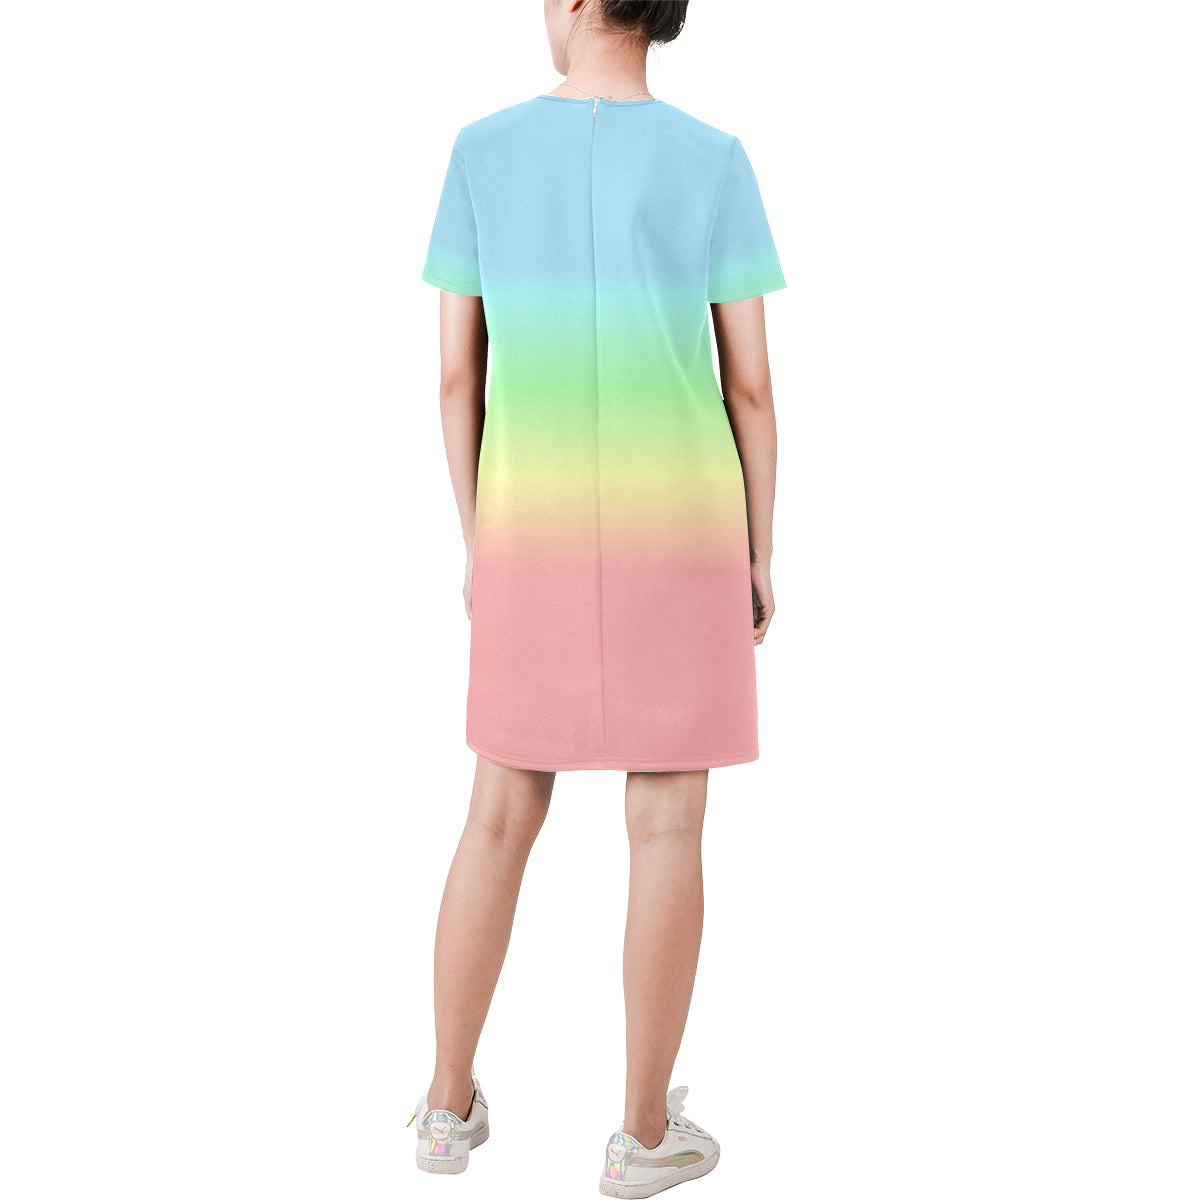 Pastel Rainbow Ombre Dress, Colorful Pink Blue Gradient Tie Dye Short-Sleeve Summer Round Neck A-Line Dress Starcove Fashion